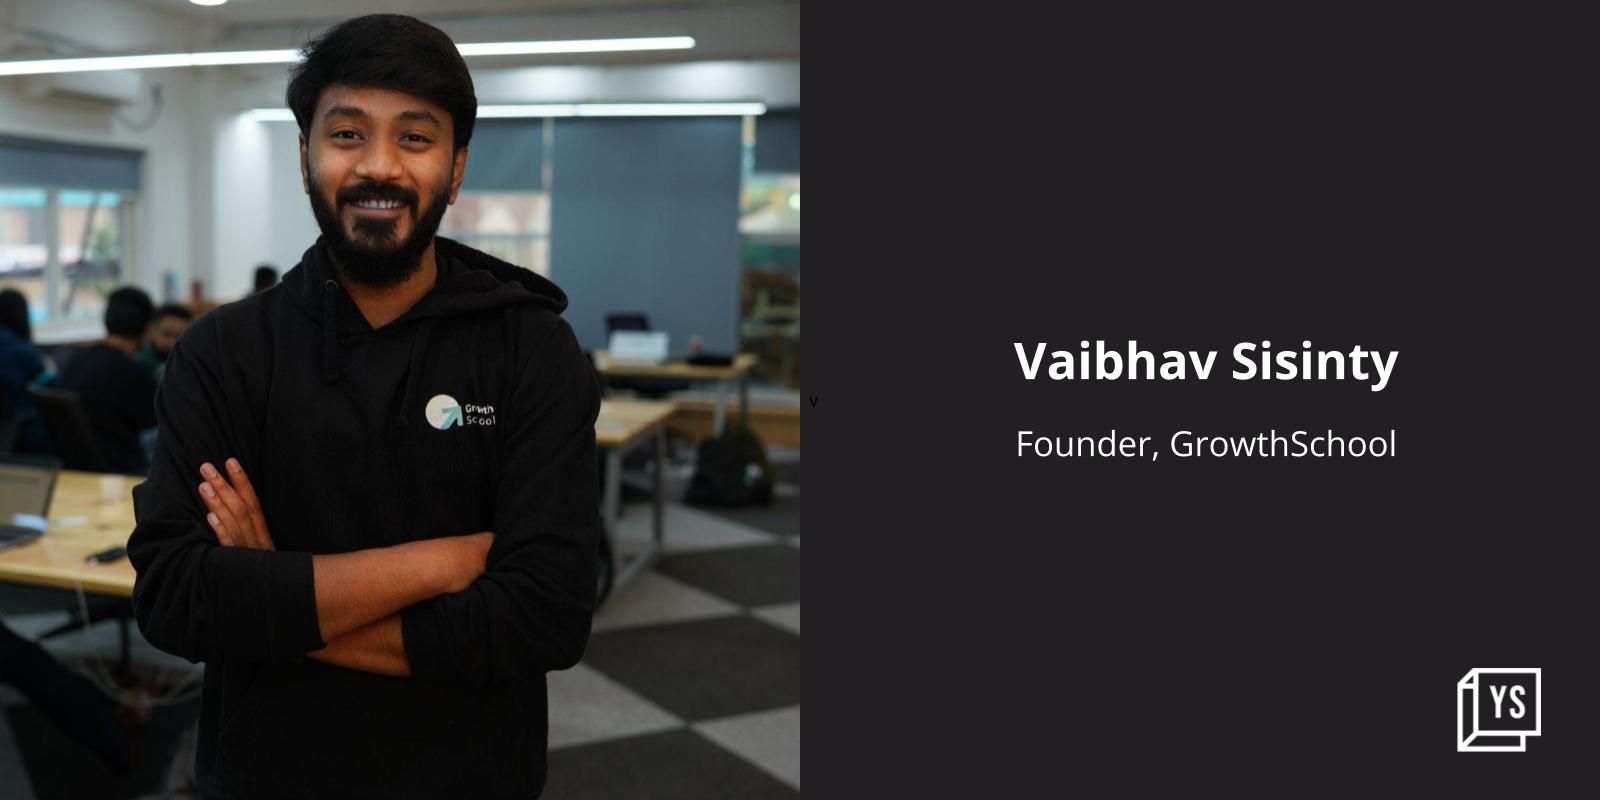 People truly want to upskill and grow: GrowthSchool’s Vaibhav Sisinty